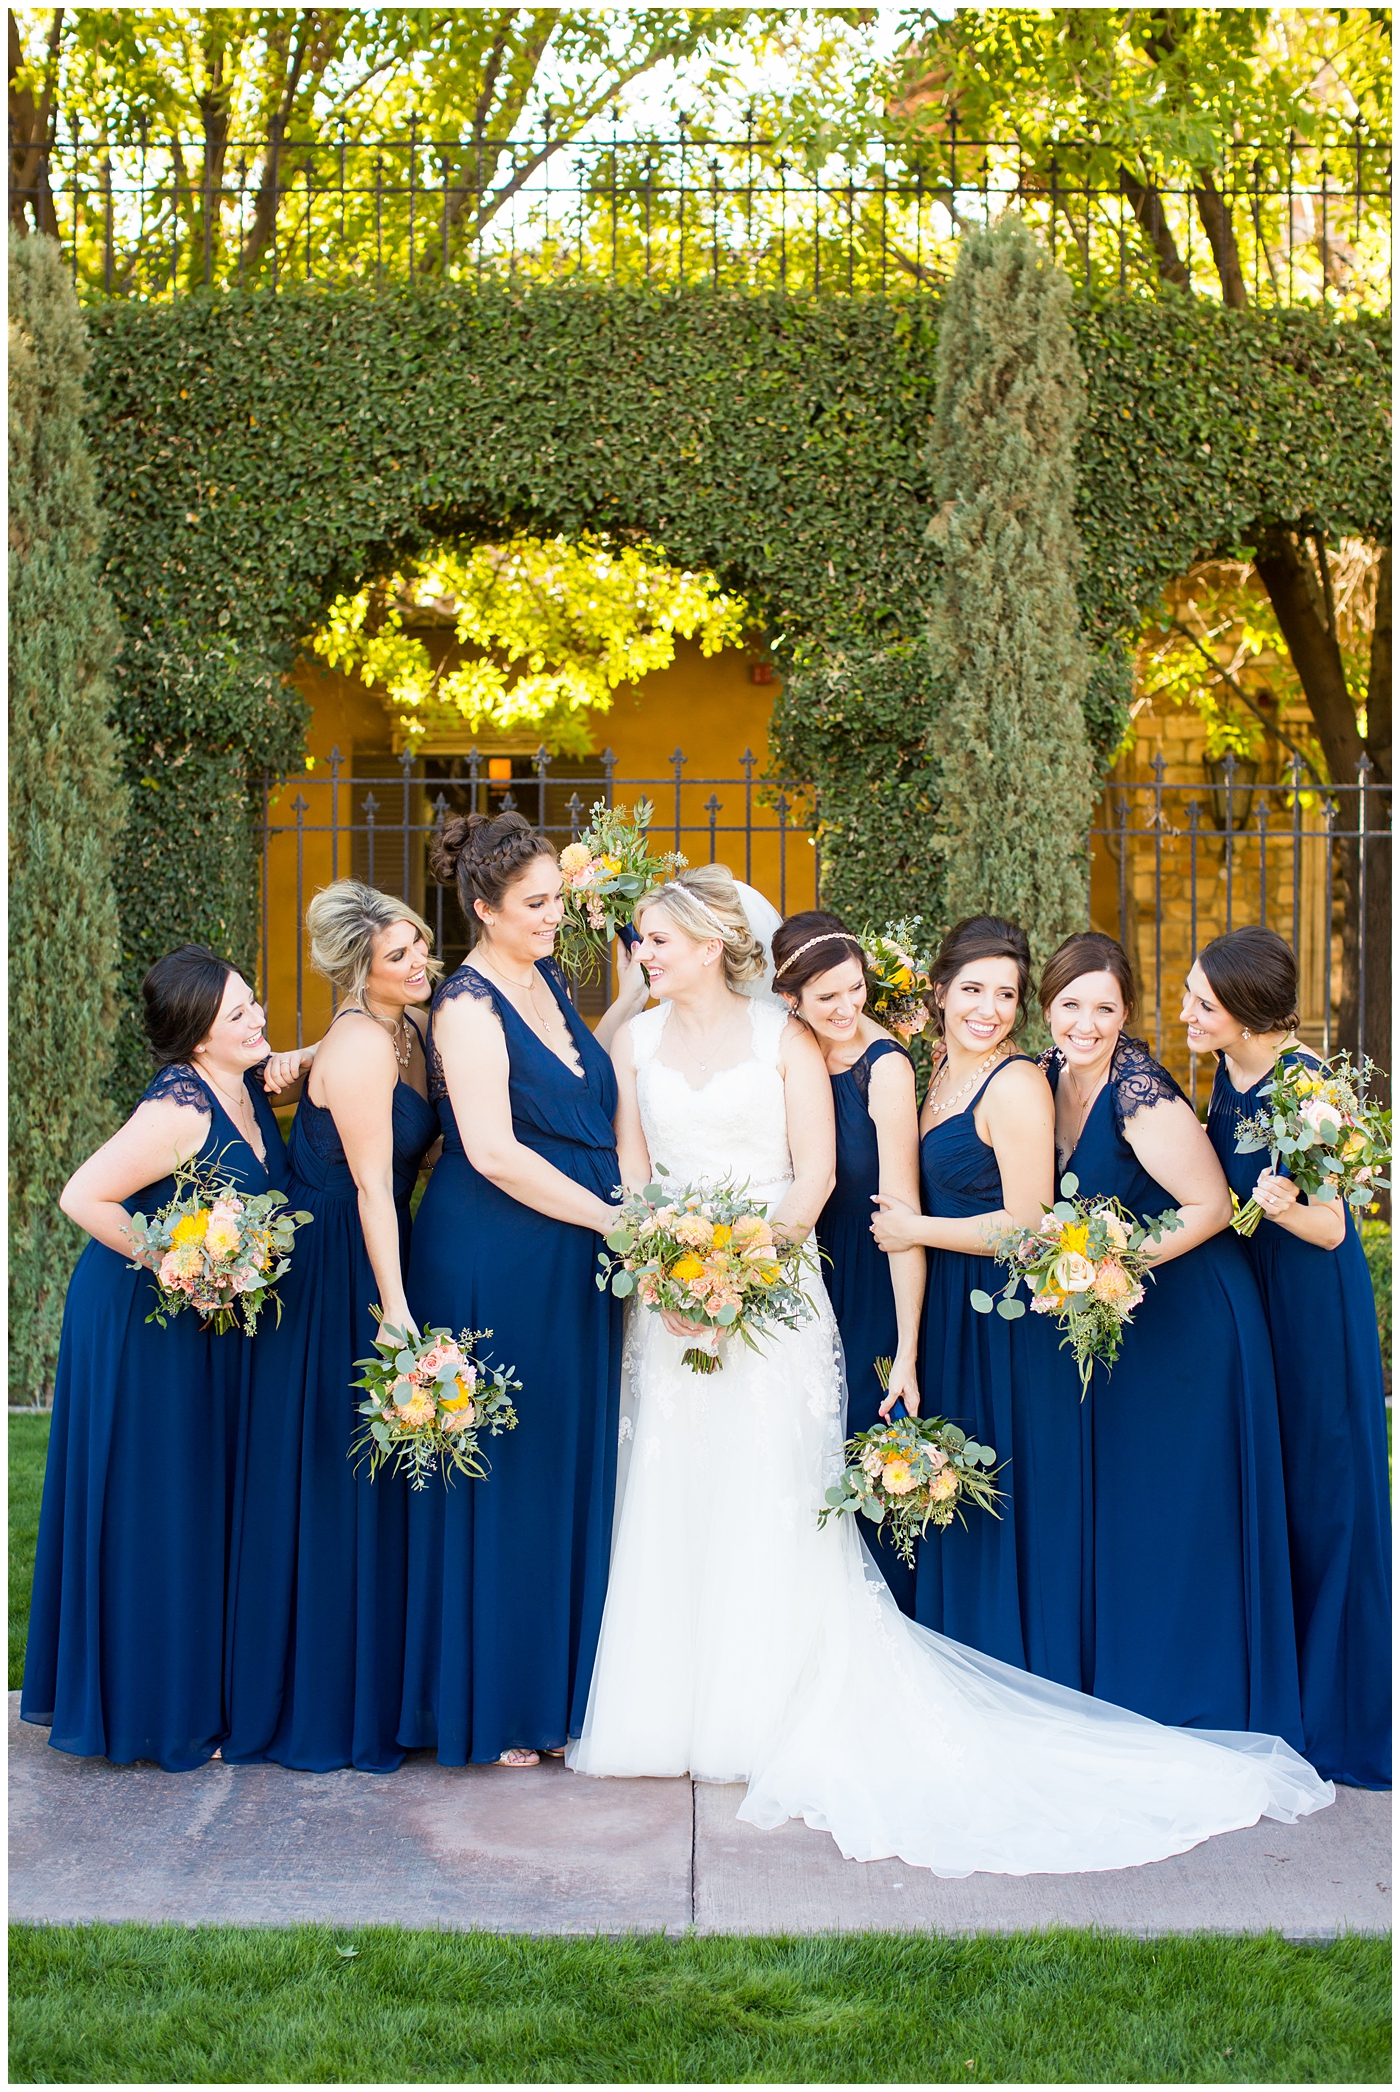 bride in essence designs wedding dress with cap sleeves portrait group shot with bridesmaids in navy blue long dresses